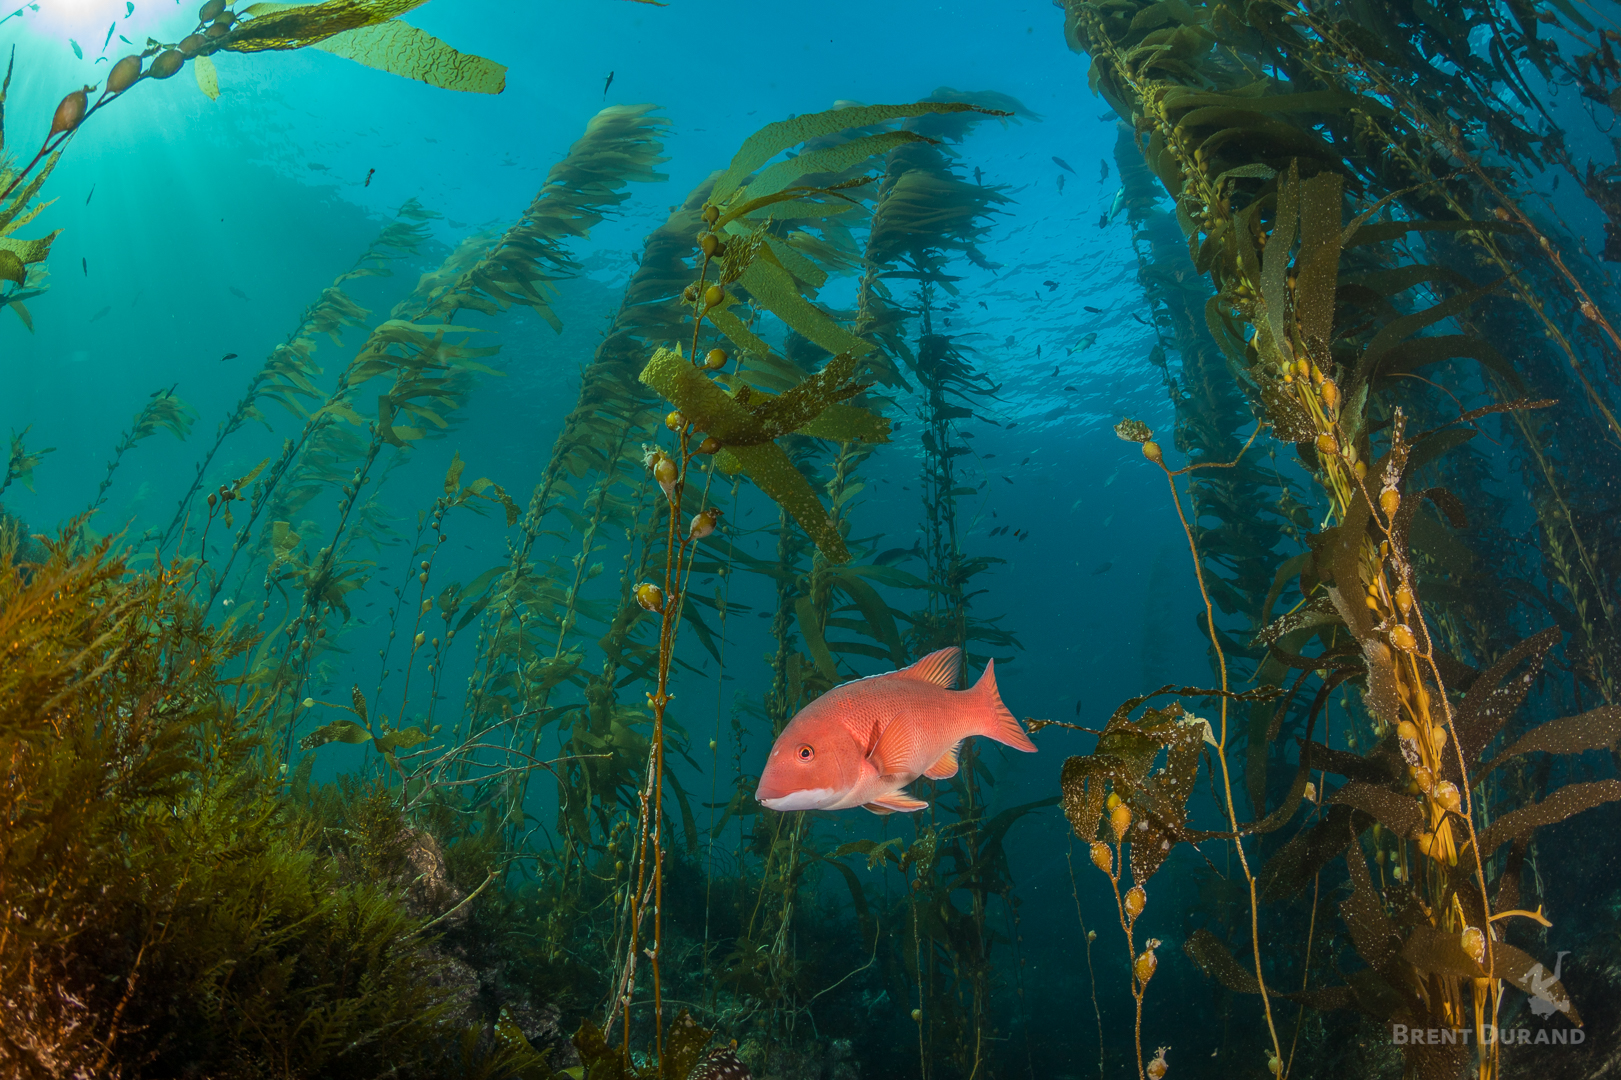 A female sheephead swims through the towering kelp forest at Anacapa Island in California's Channel Islands National Park.